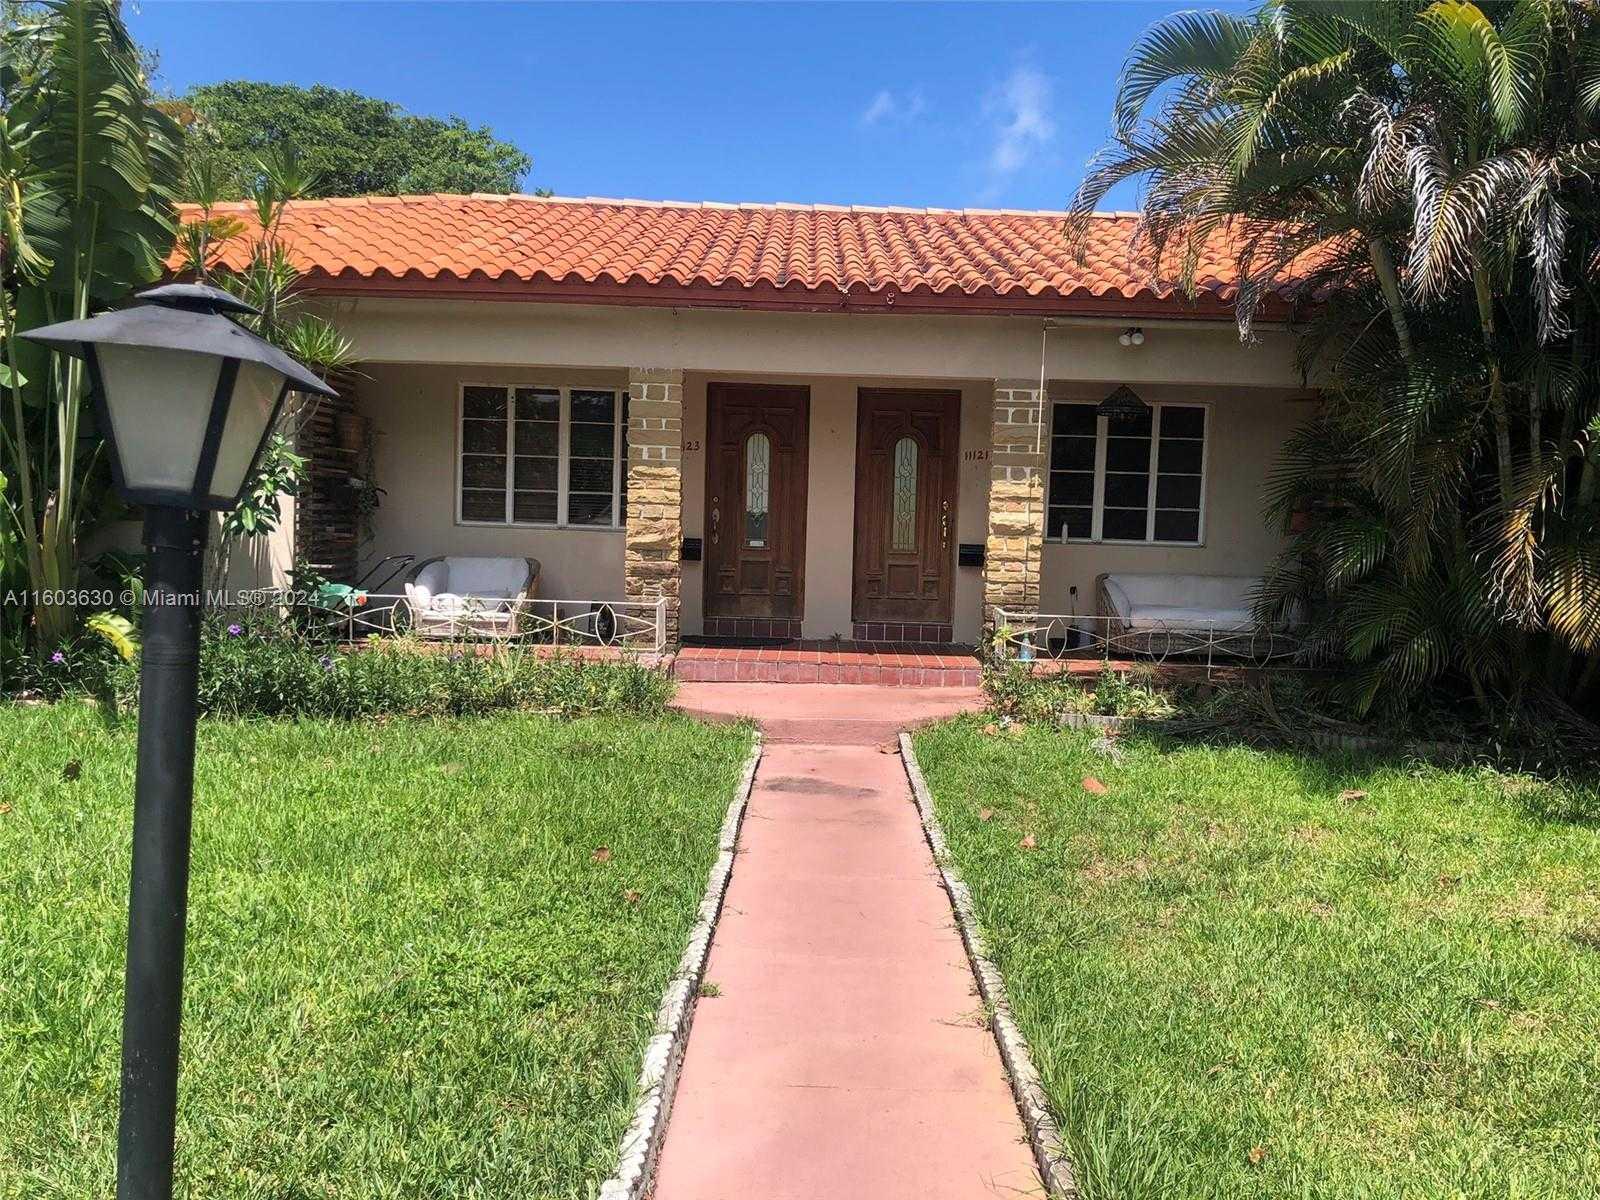 11121 9th Ct, Biscayne Park, Multi Family Home,  for sale, Kamany Realty & Property Management Inc.